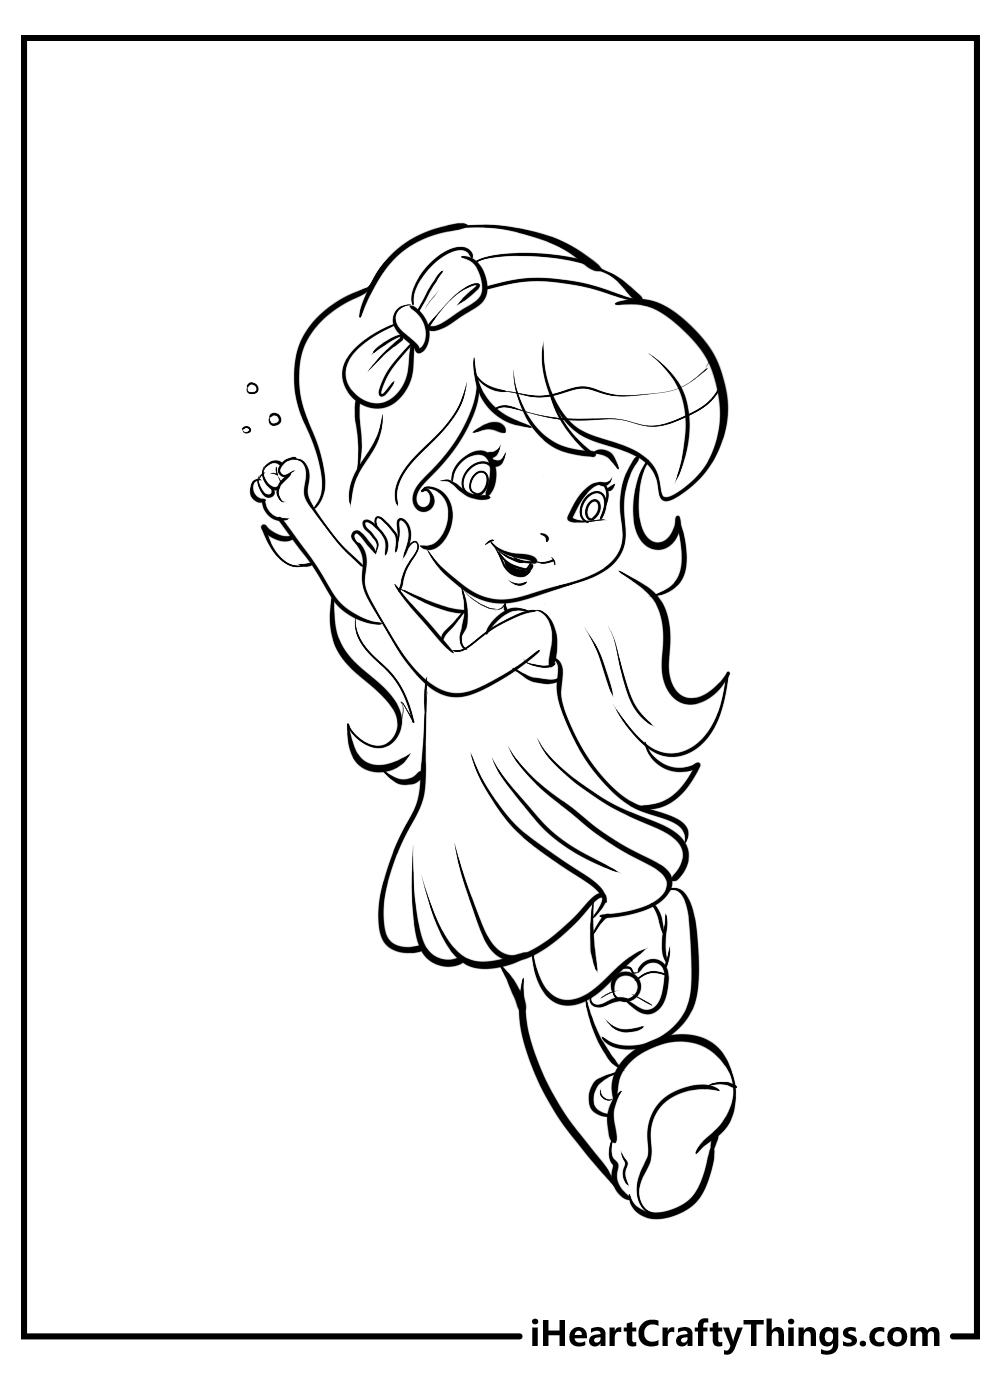 Original Strawberry Shortcake Coloring Pages